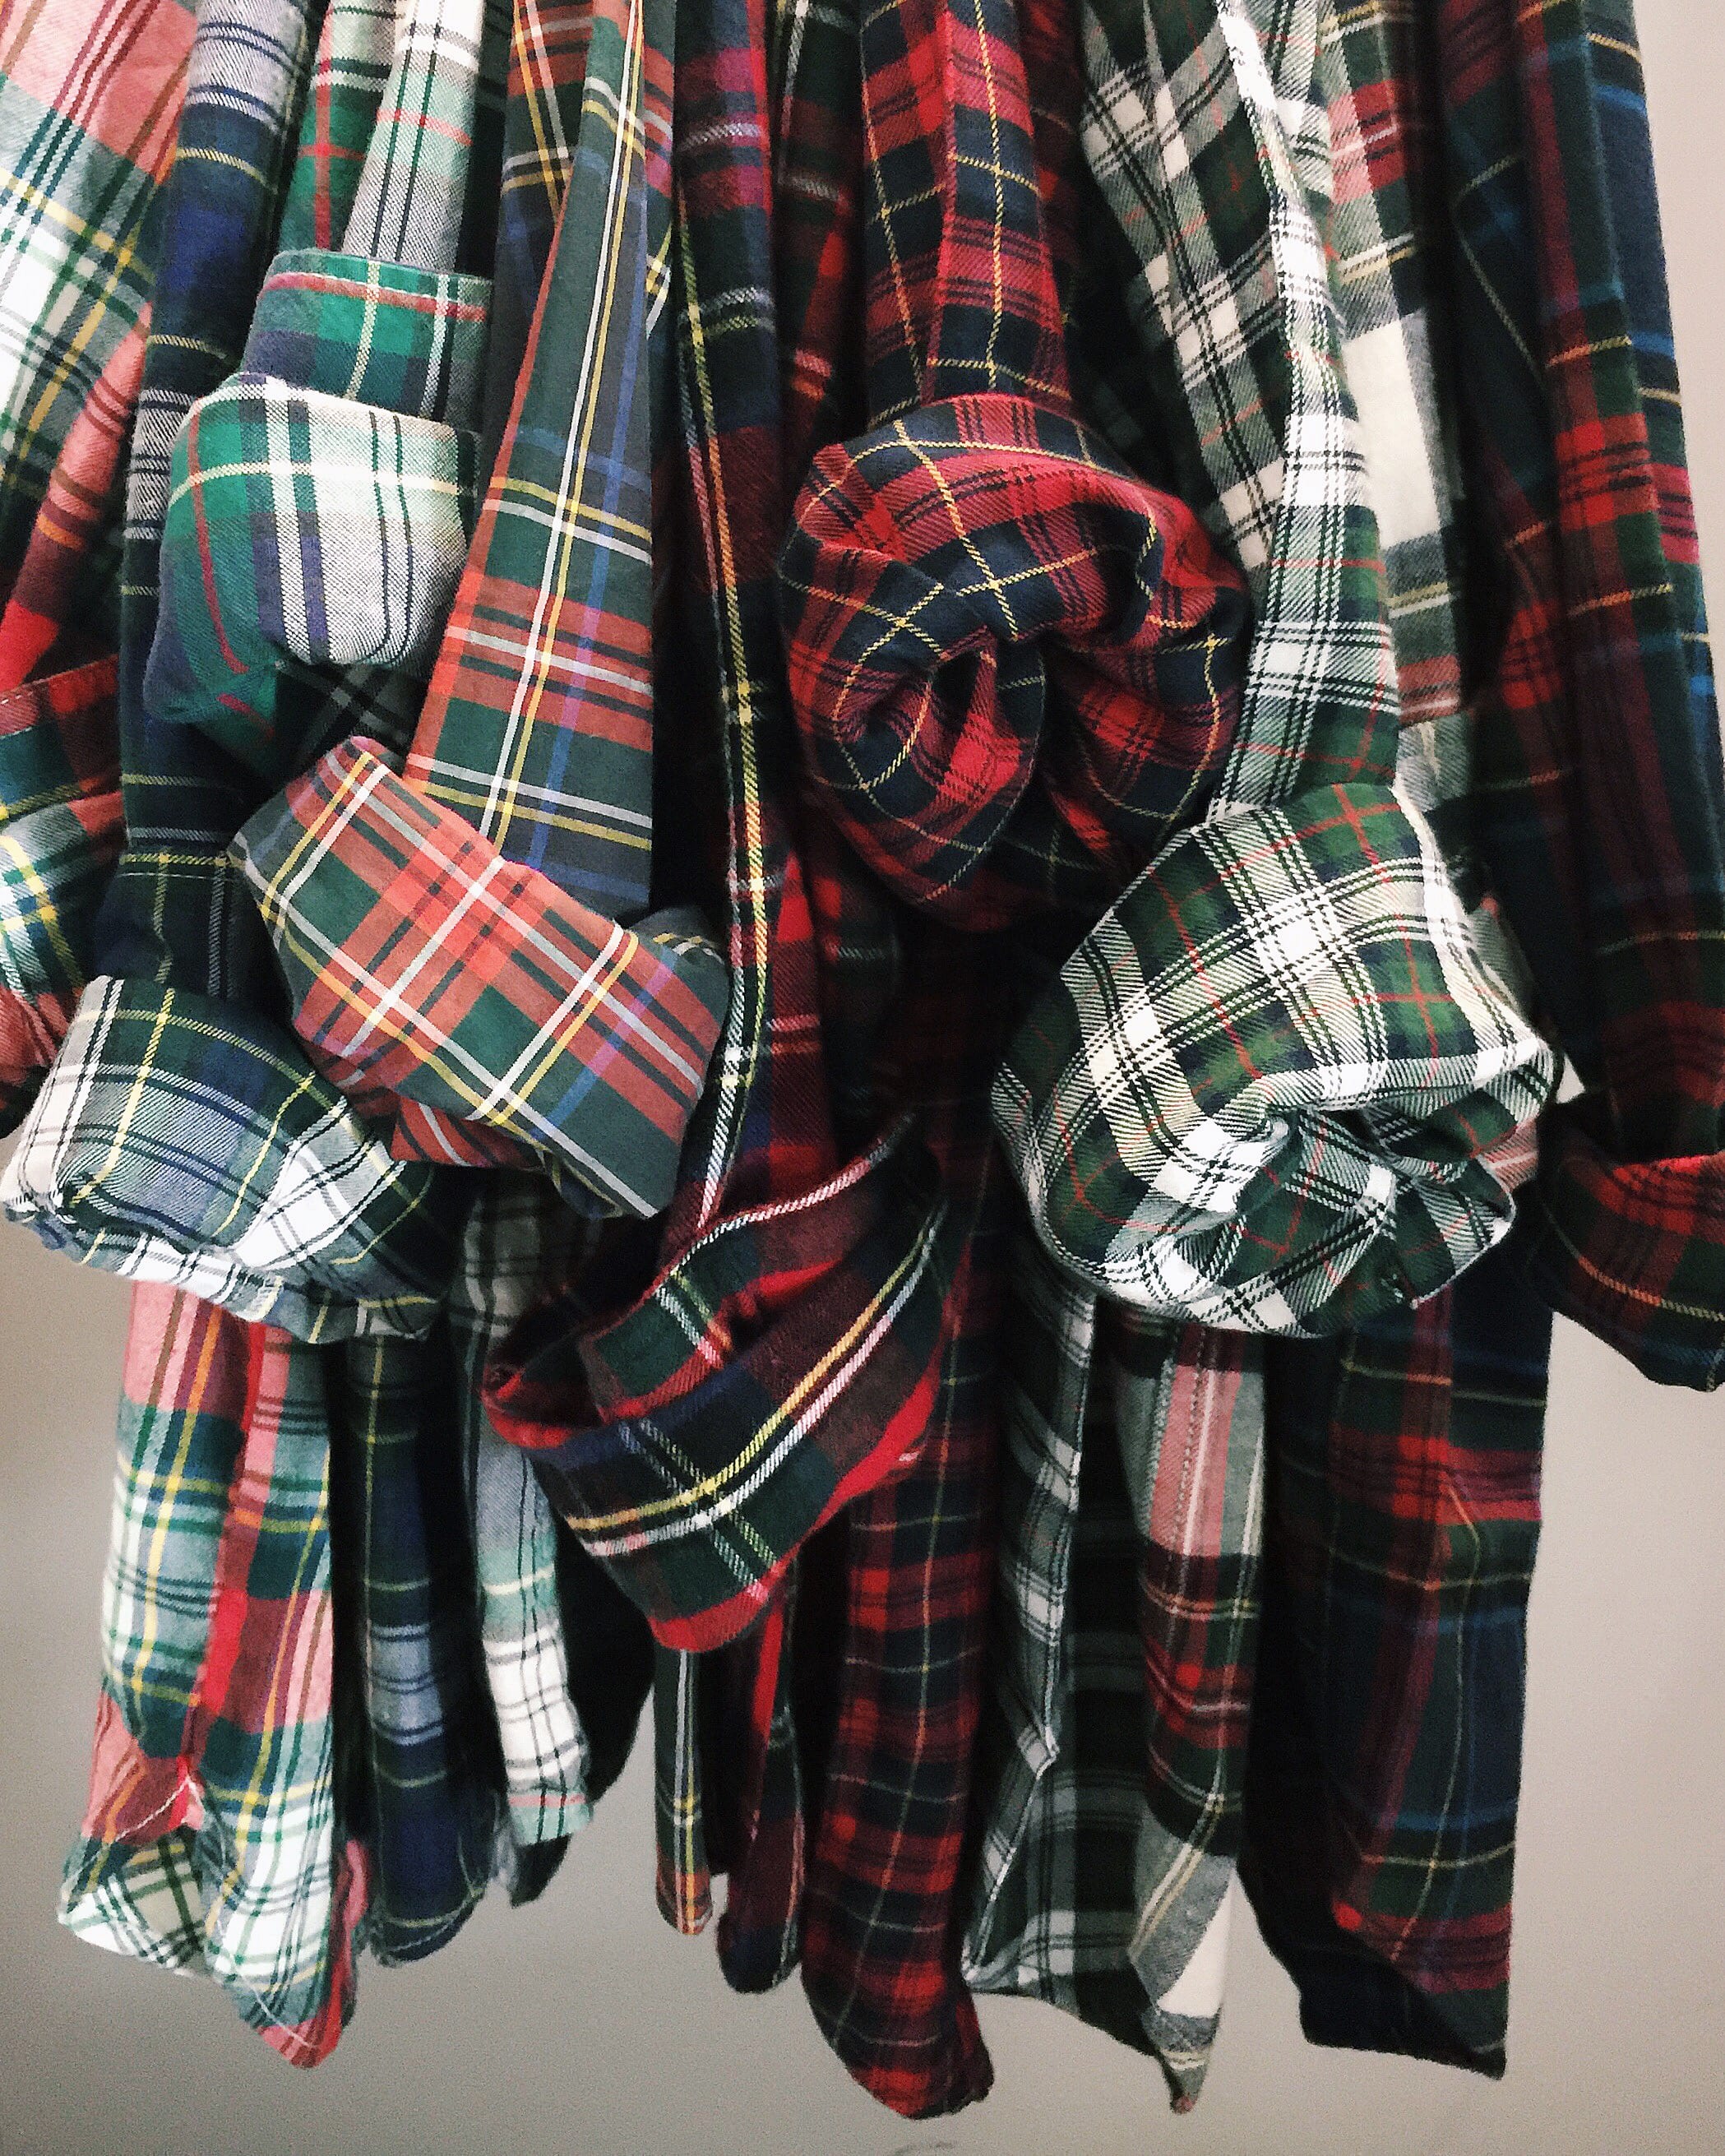 Best Places to Buy Plaid and Flannel Shirts